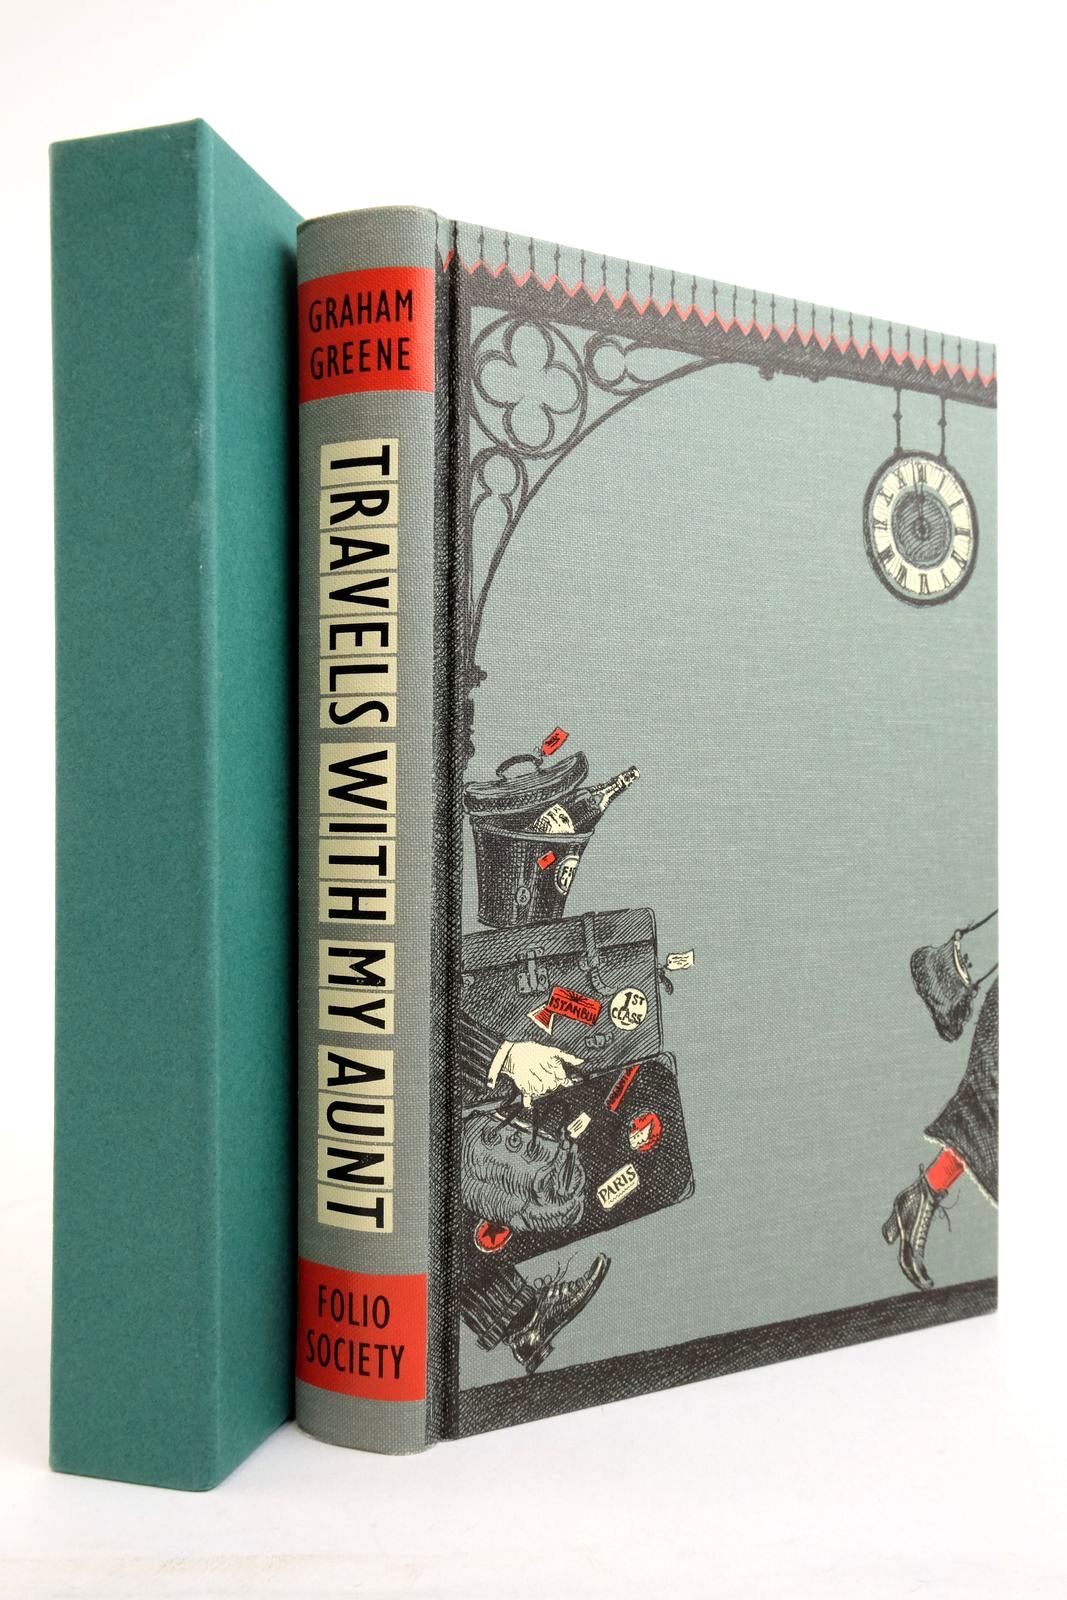 Photo of TRAVELS WITH MY AUNT: A NOVEL written by Greene, Graham Mortimer, John illustrated by Holder, John published by Folio Society (STOCK CODE: 2136513)  for sale by Stella & Rose's Books